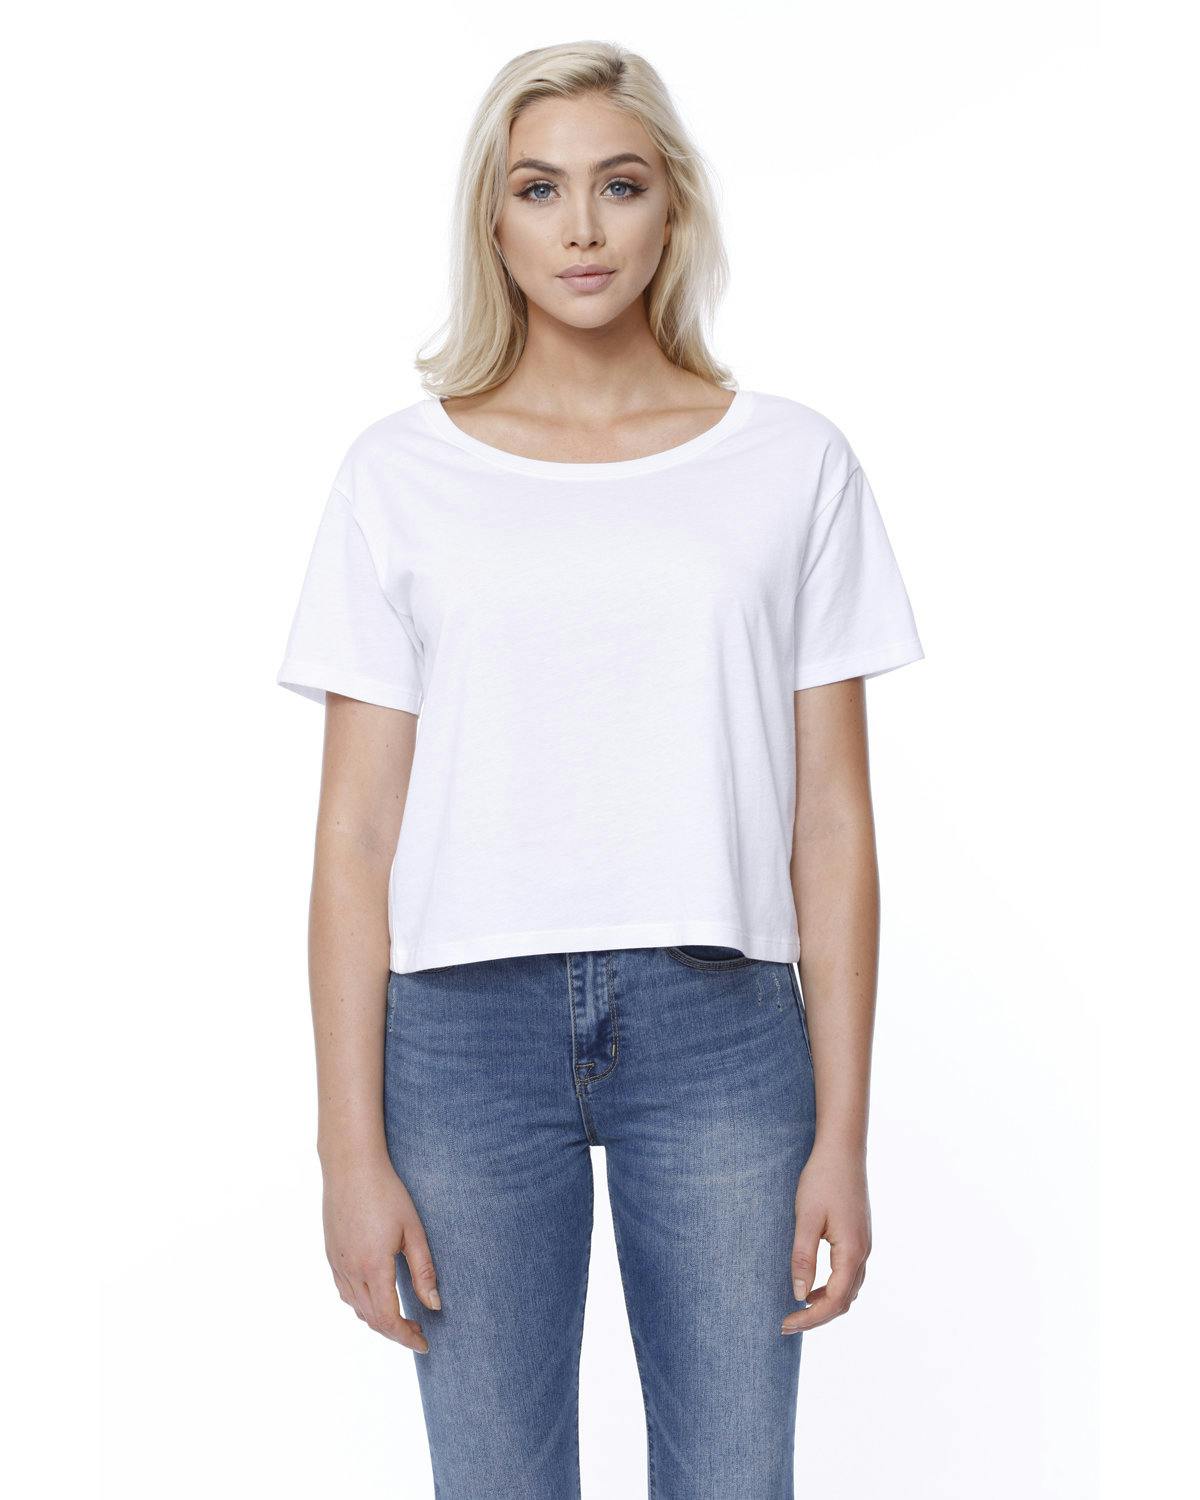 Image for Ladies' Boxy Cotton T-Shirt